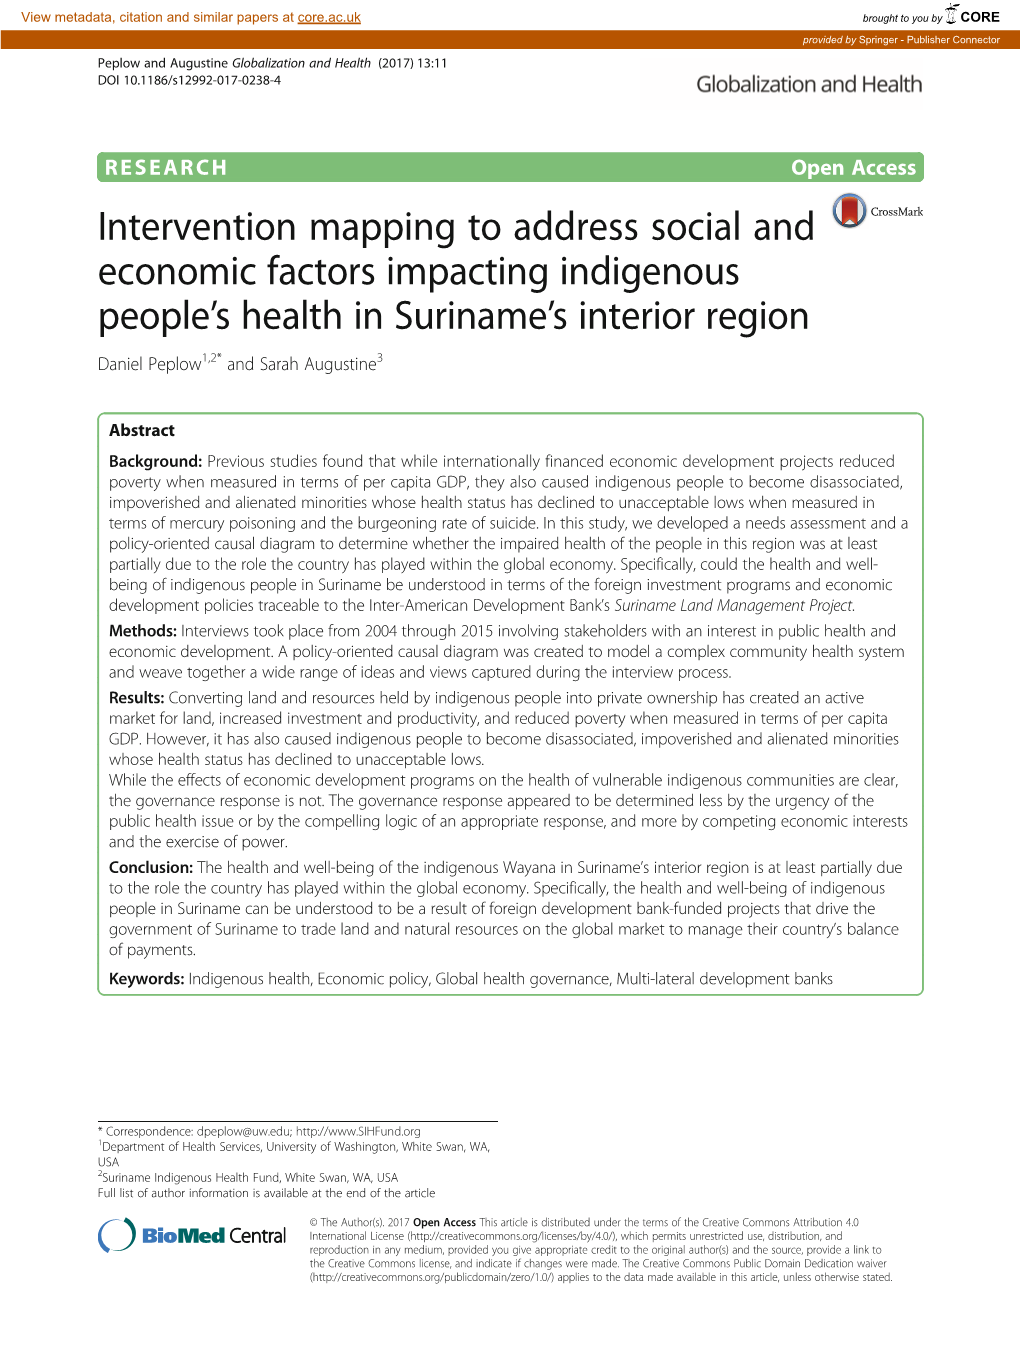 Intervention Mapping to Address Social and Economic Factors Impacting Indigenous People’S Health in Suriname’S Interior Region Daniel Peplow1,2* and Sarah Augustine3